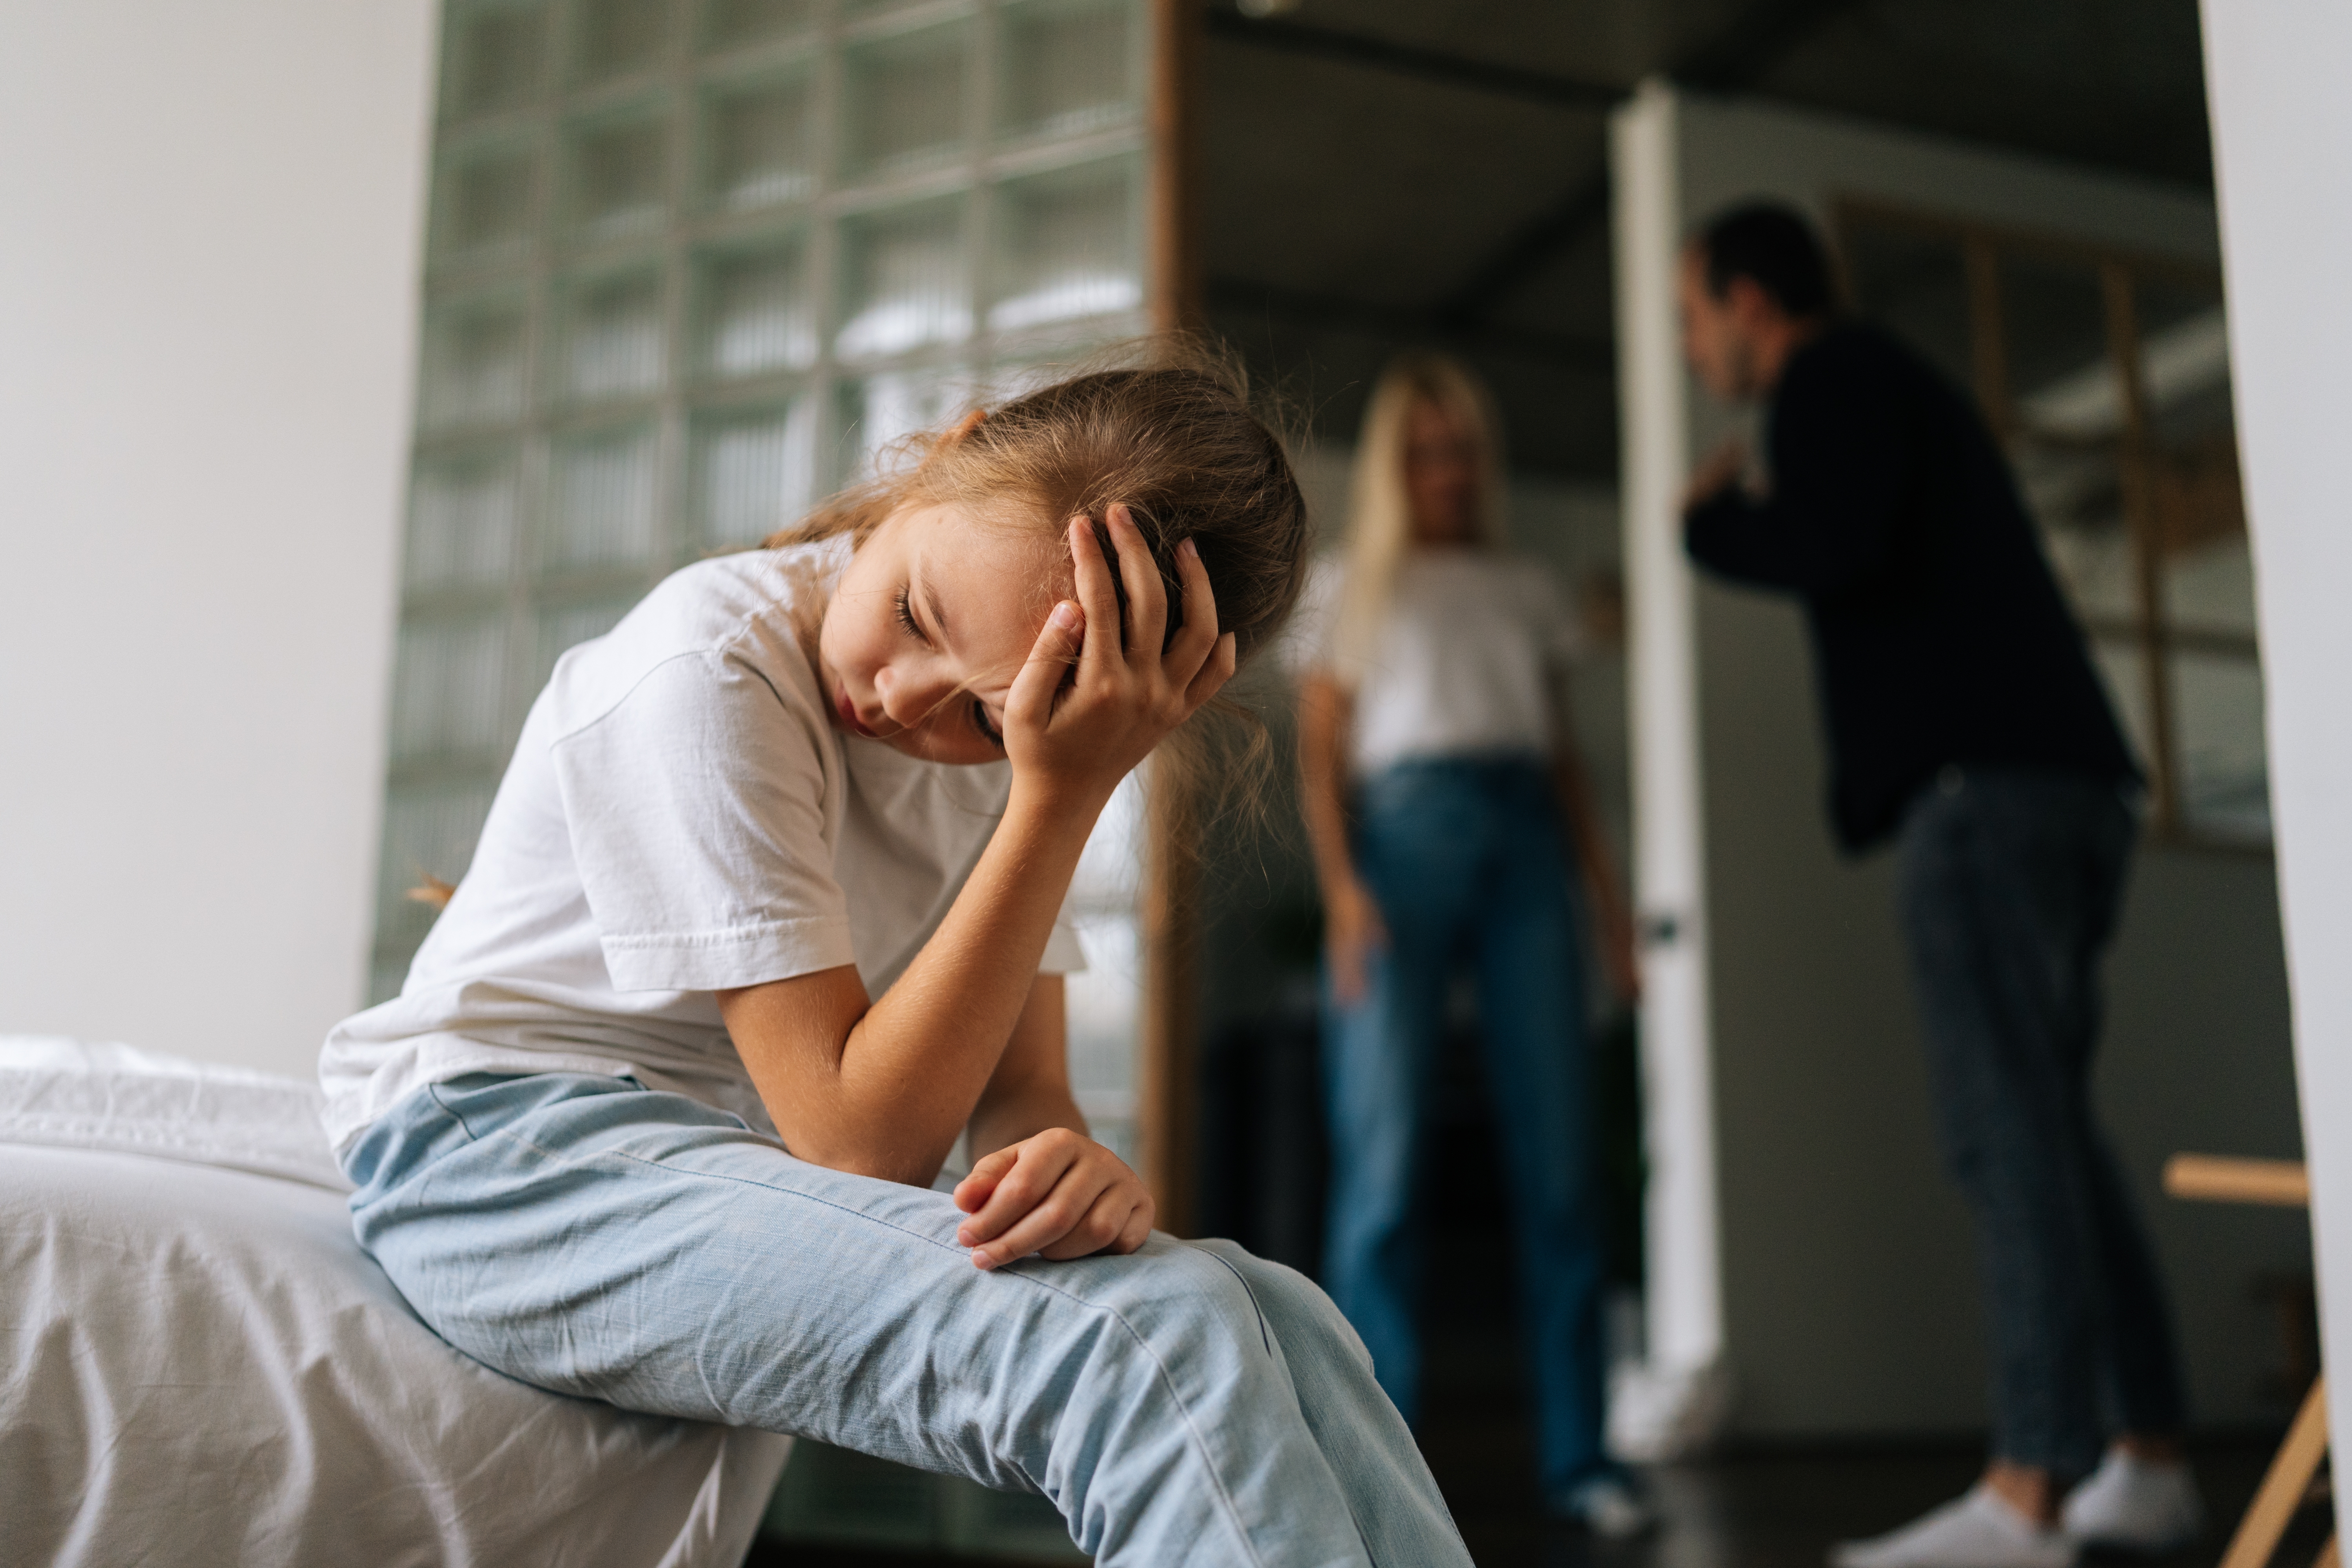 The man had his ups and downs when it came to his stepkids, but he accepted his fate nonetheless. | Source: Shutterstock